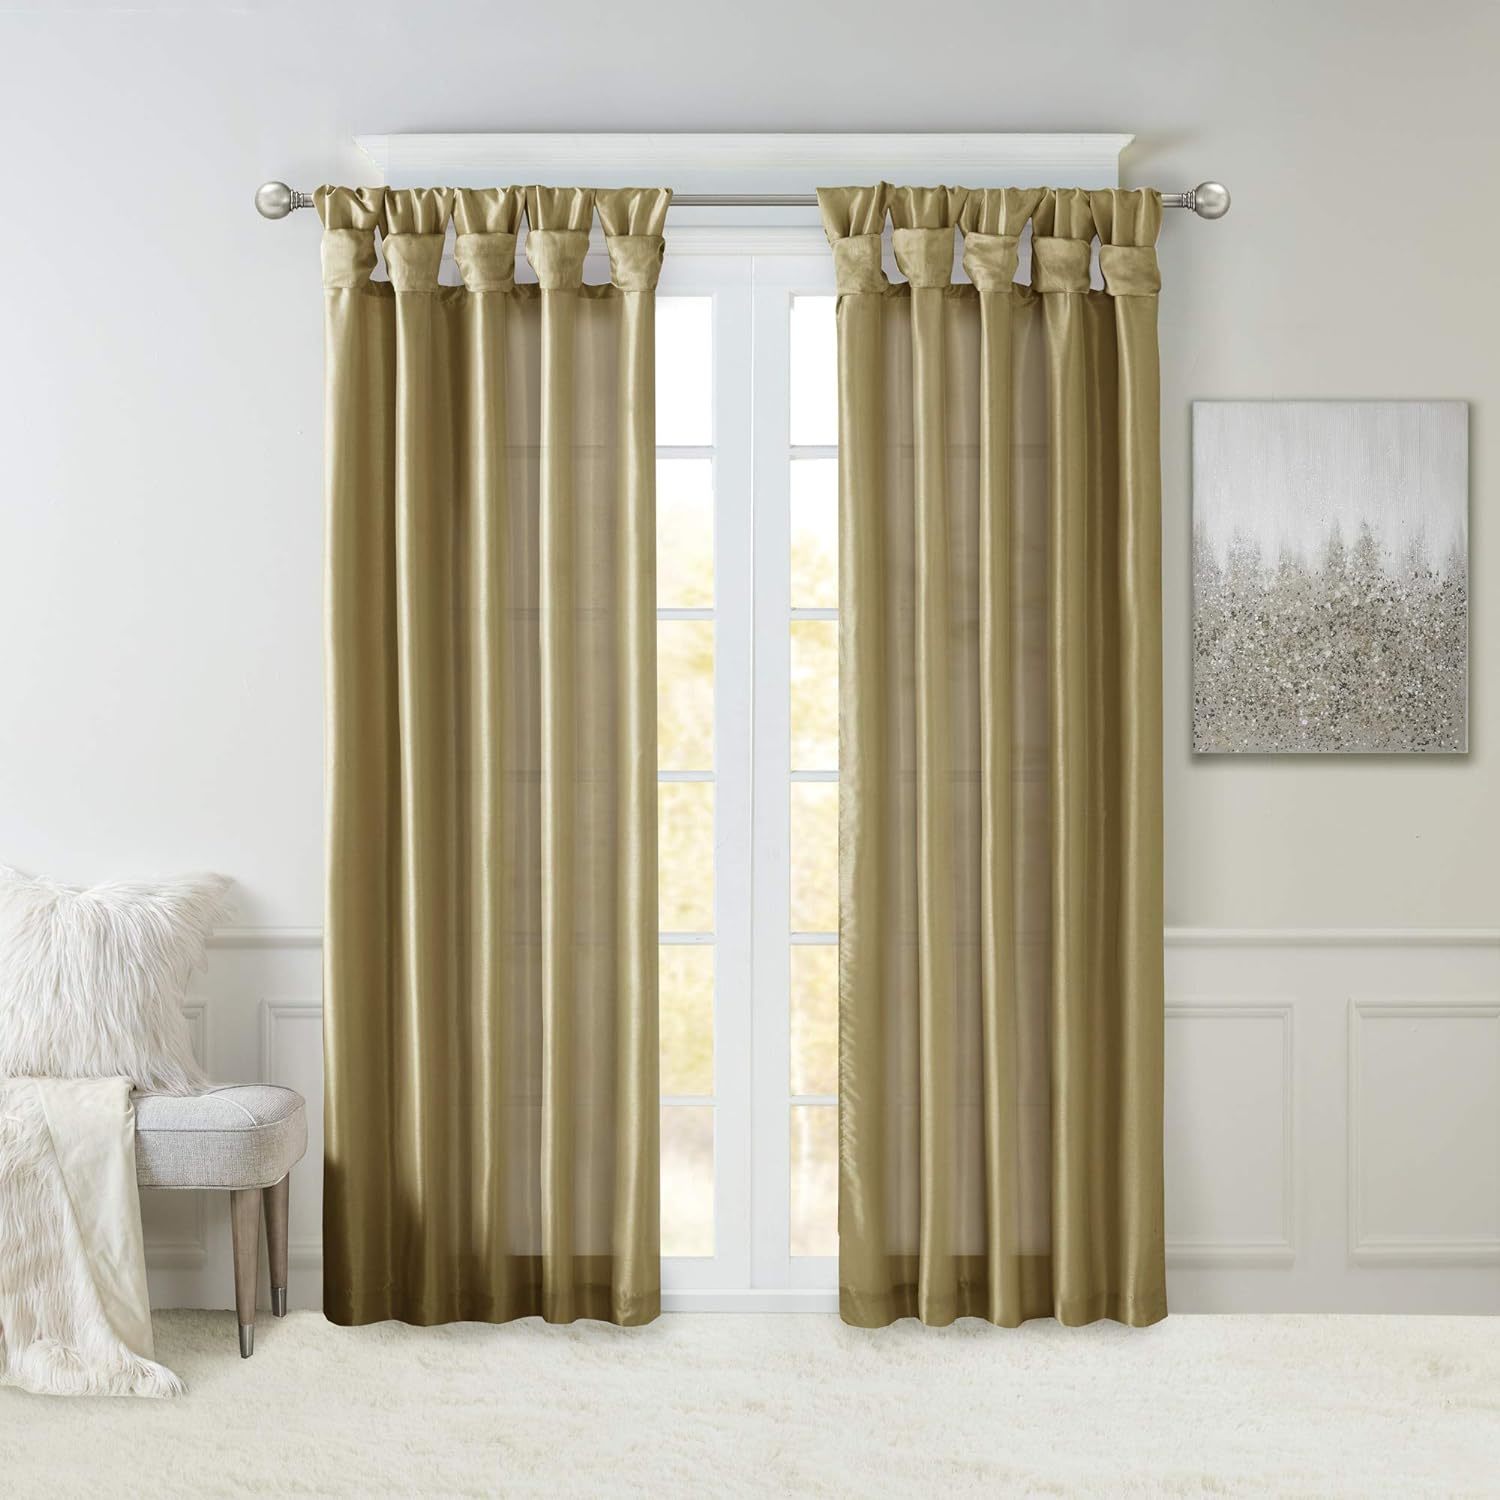 Window Drape For The Living Room, Bedroom, And Dorm By Madison Park, Bronze. - $36.96